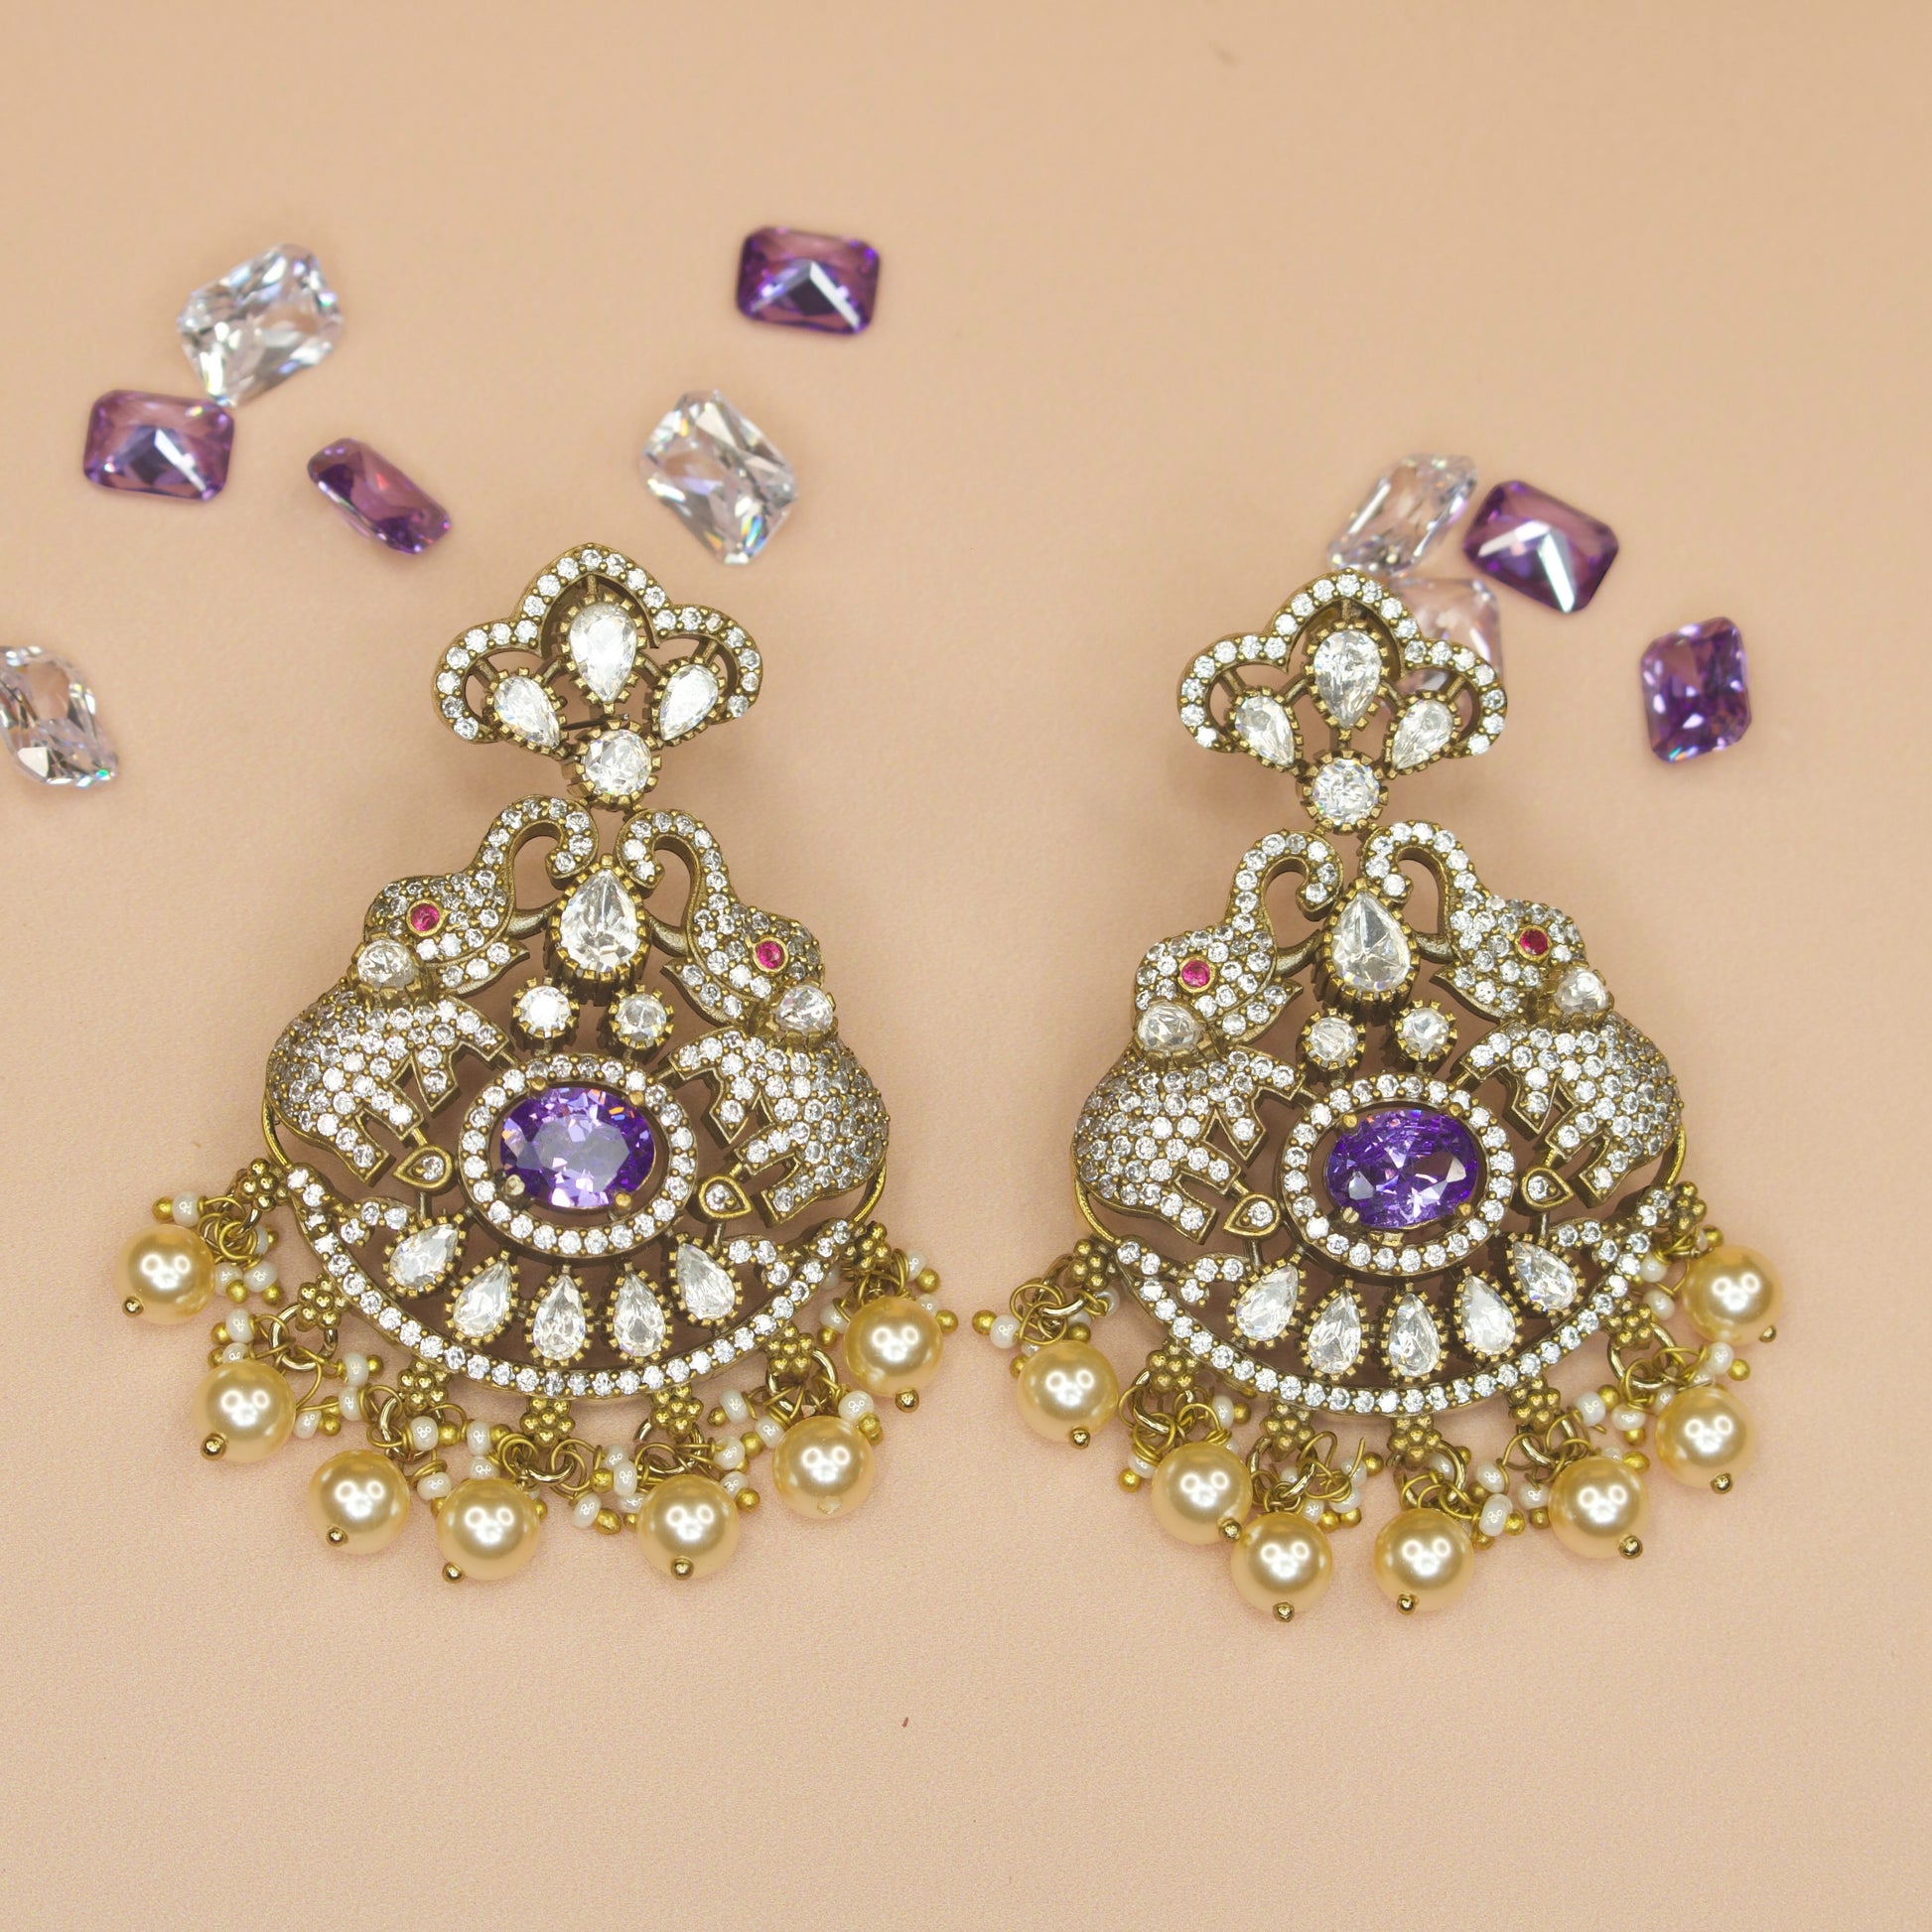 Elegant Victorian Chandbali Earrings with Elephant Motifs. This Victorian Jewellery is available in Red,Green & Purple colour variants. 